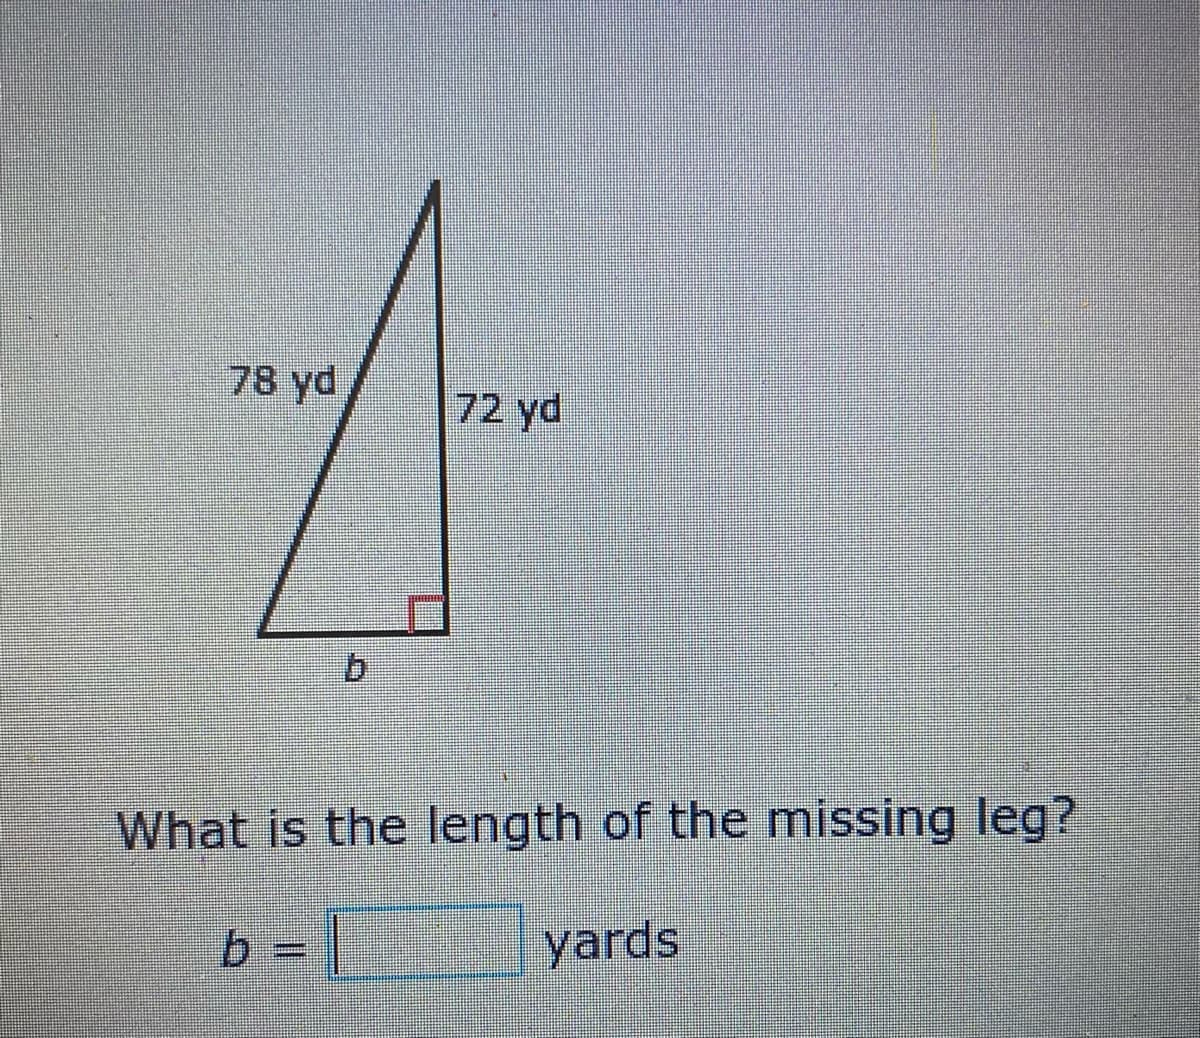 78 yd
72 yd
What is the length of the missing leg?
b = |
yards
